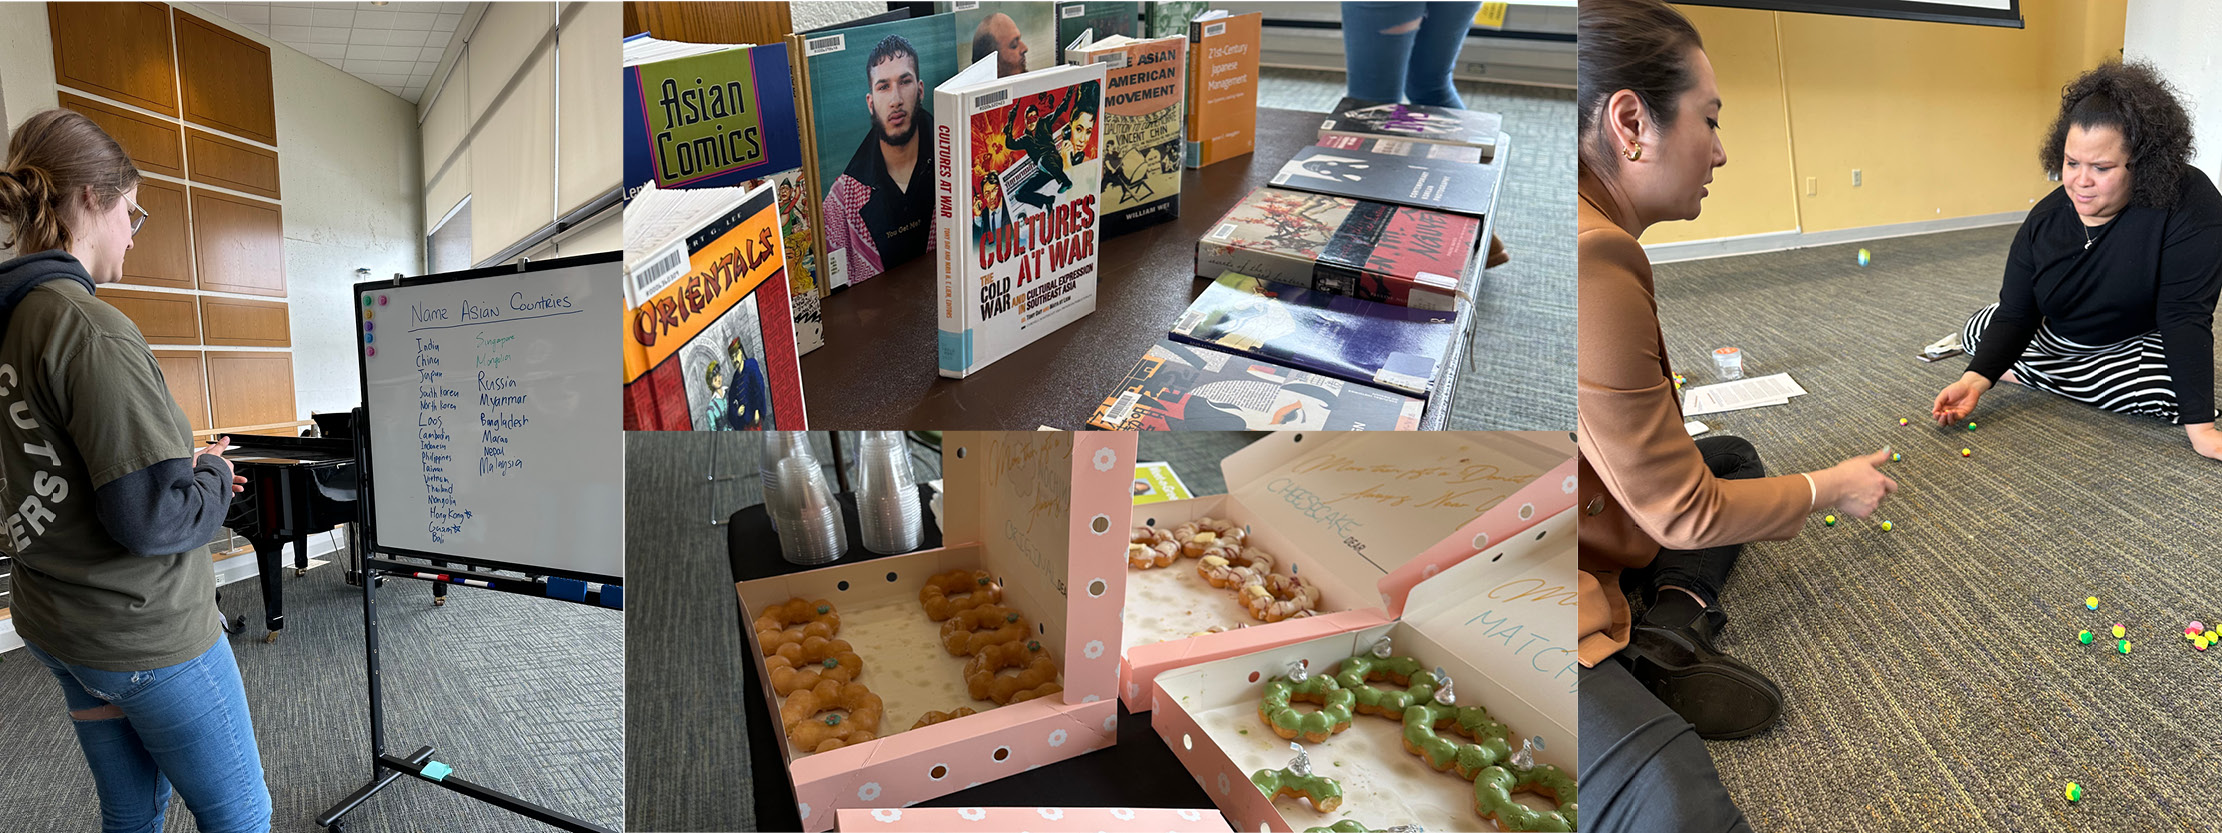 collage of images of people playing games, food and book display